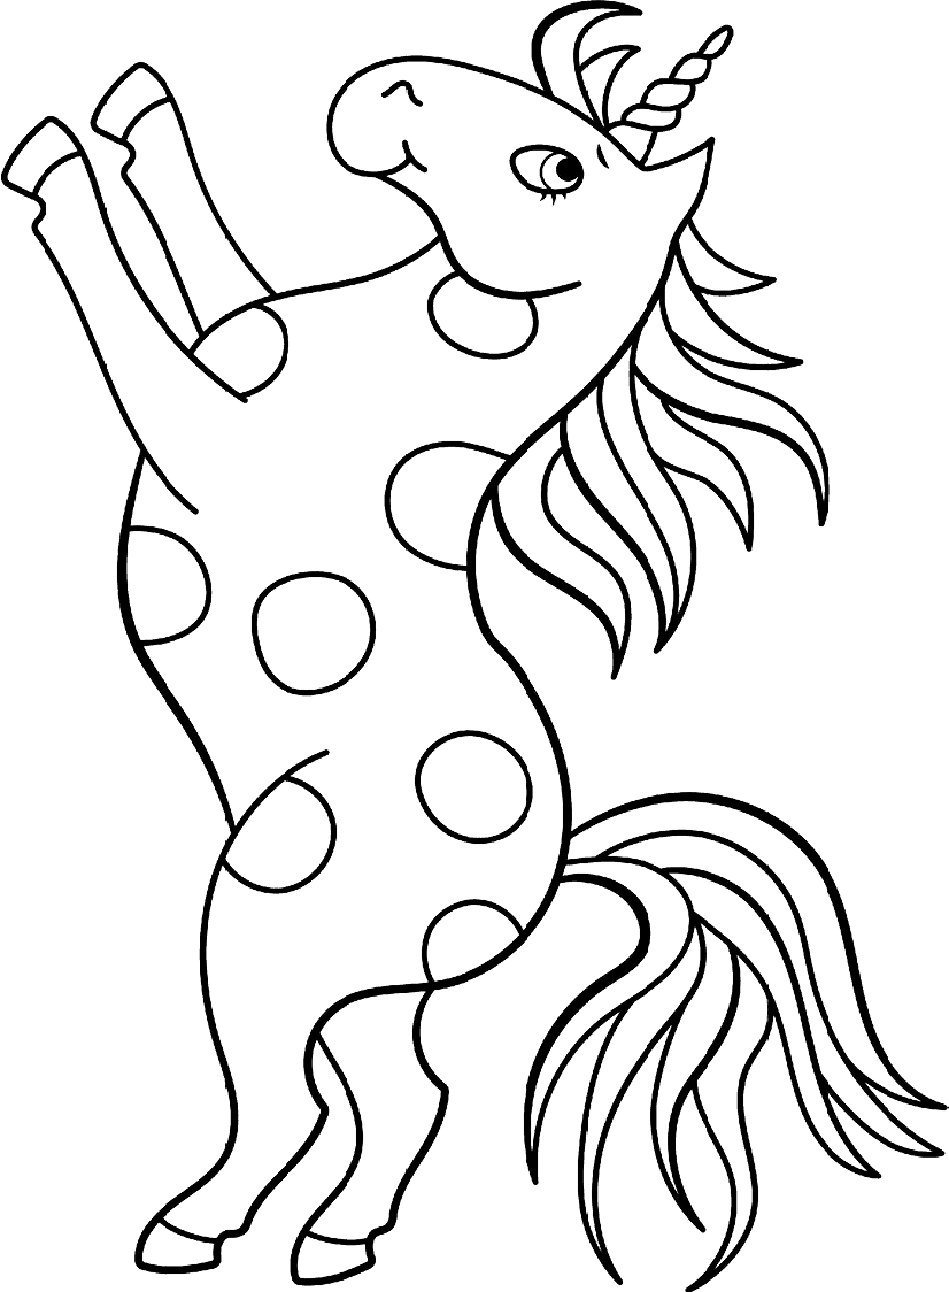 Spotted Unicorn Running Coloring Page